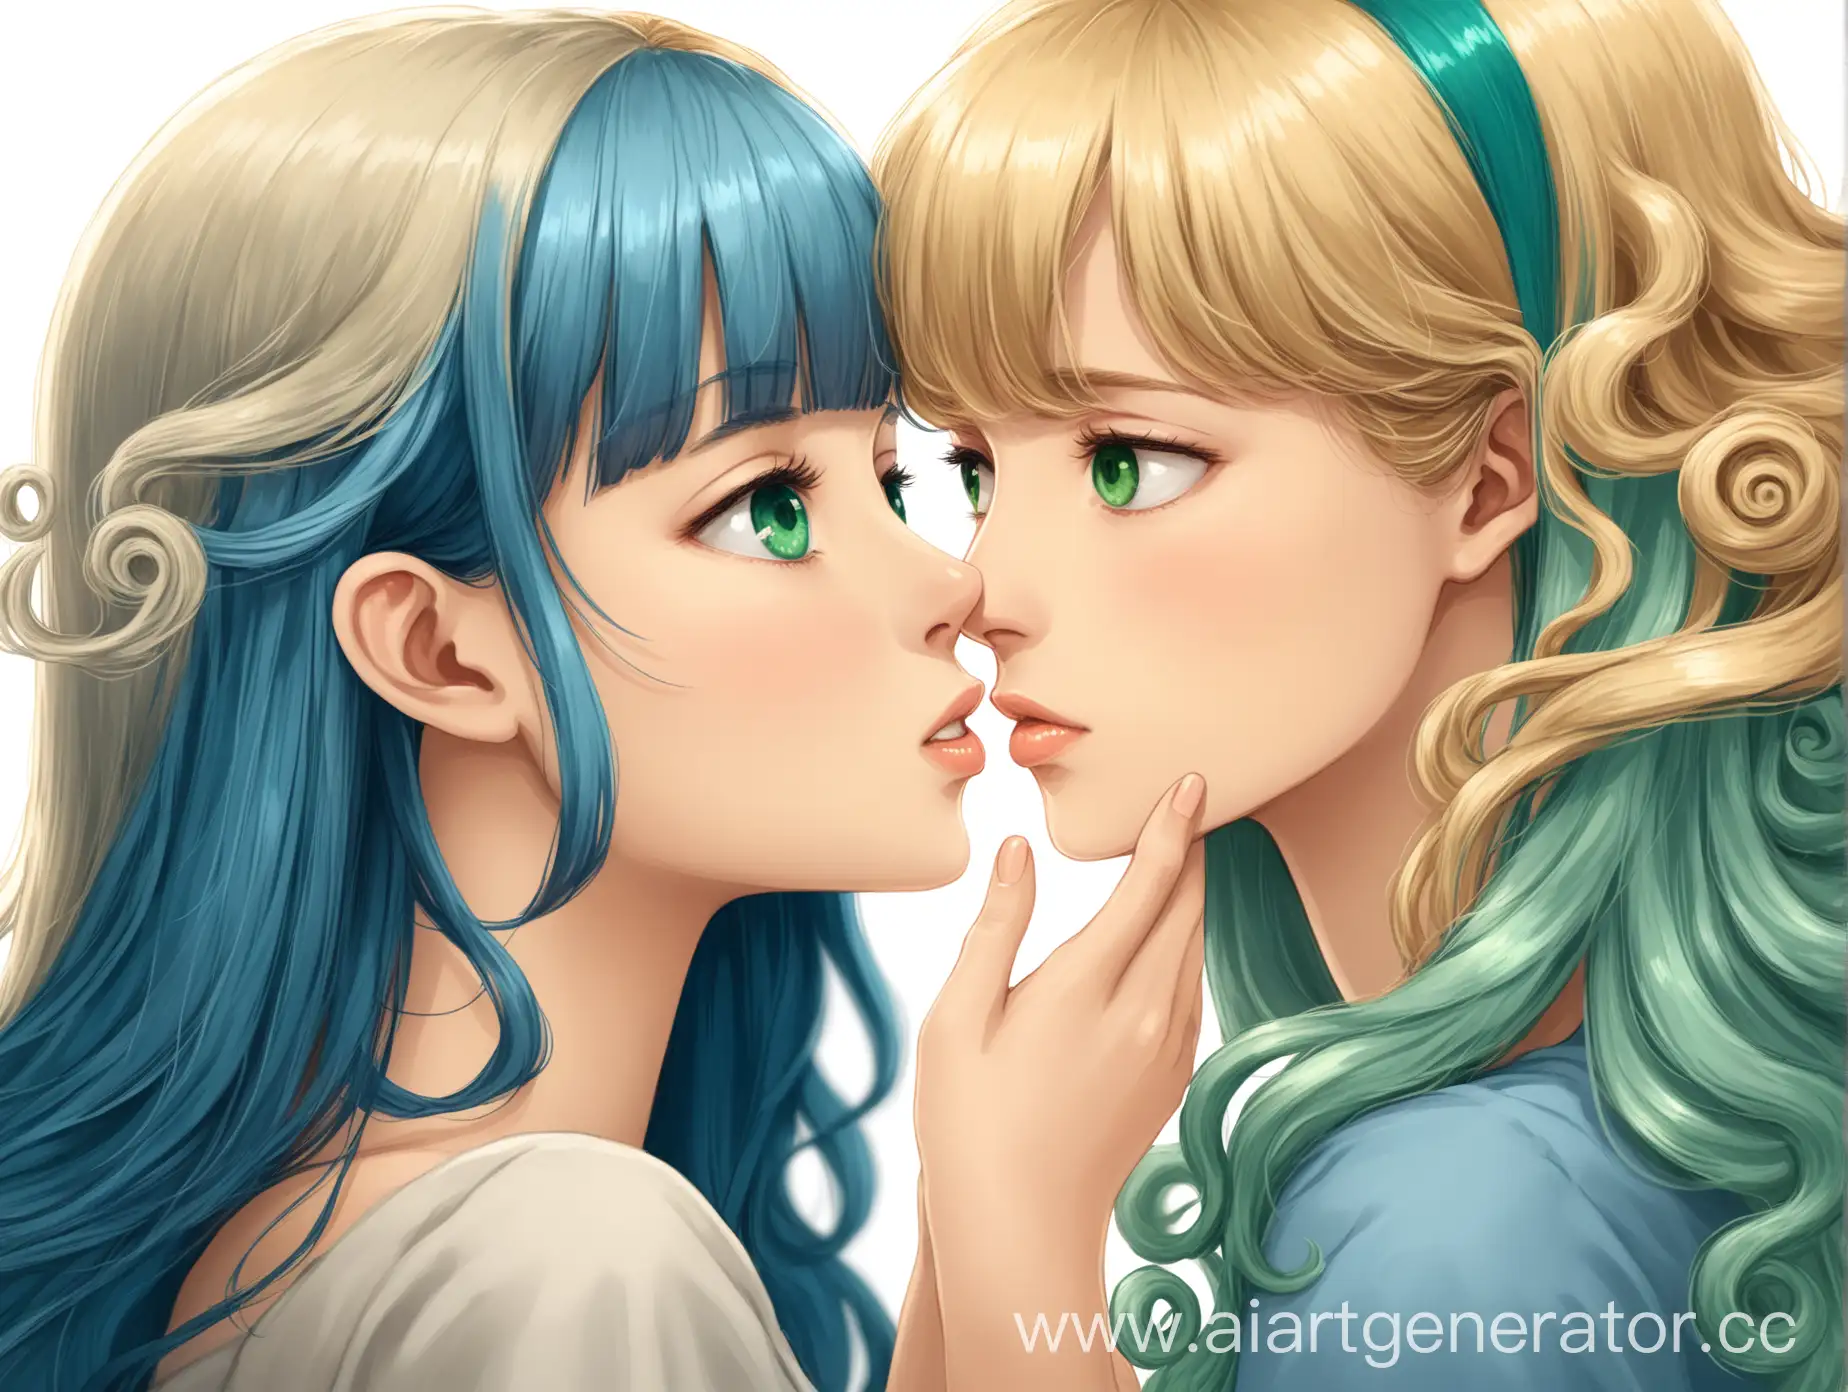 Affectionate-Blonde-Woman-Kissing-Curly-BlueHaired-Girl